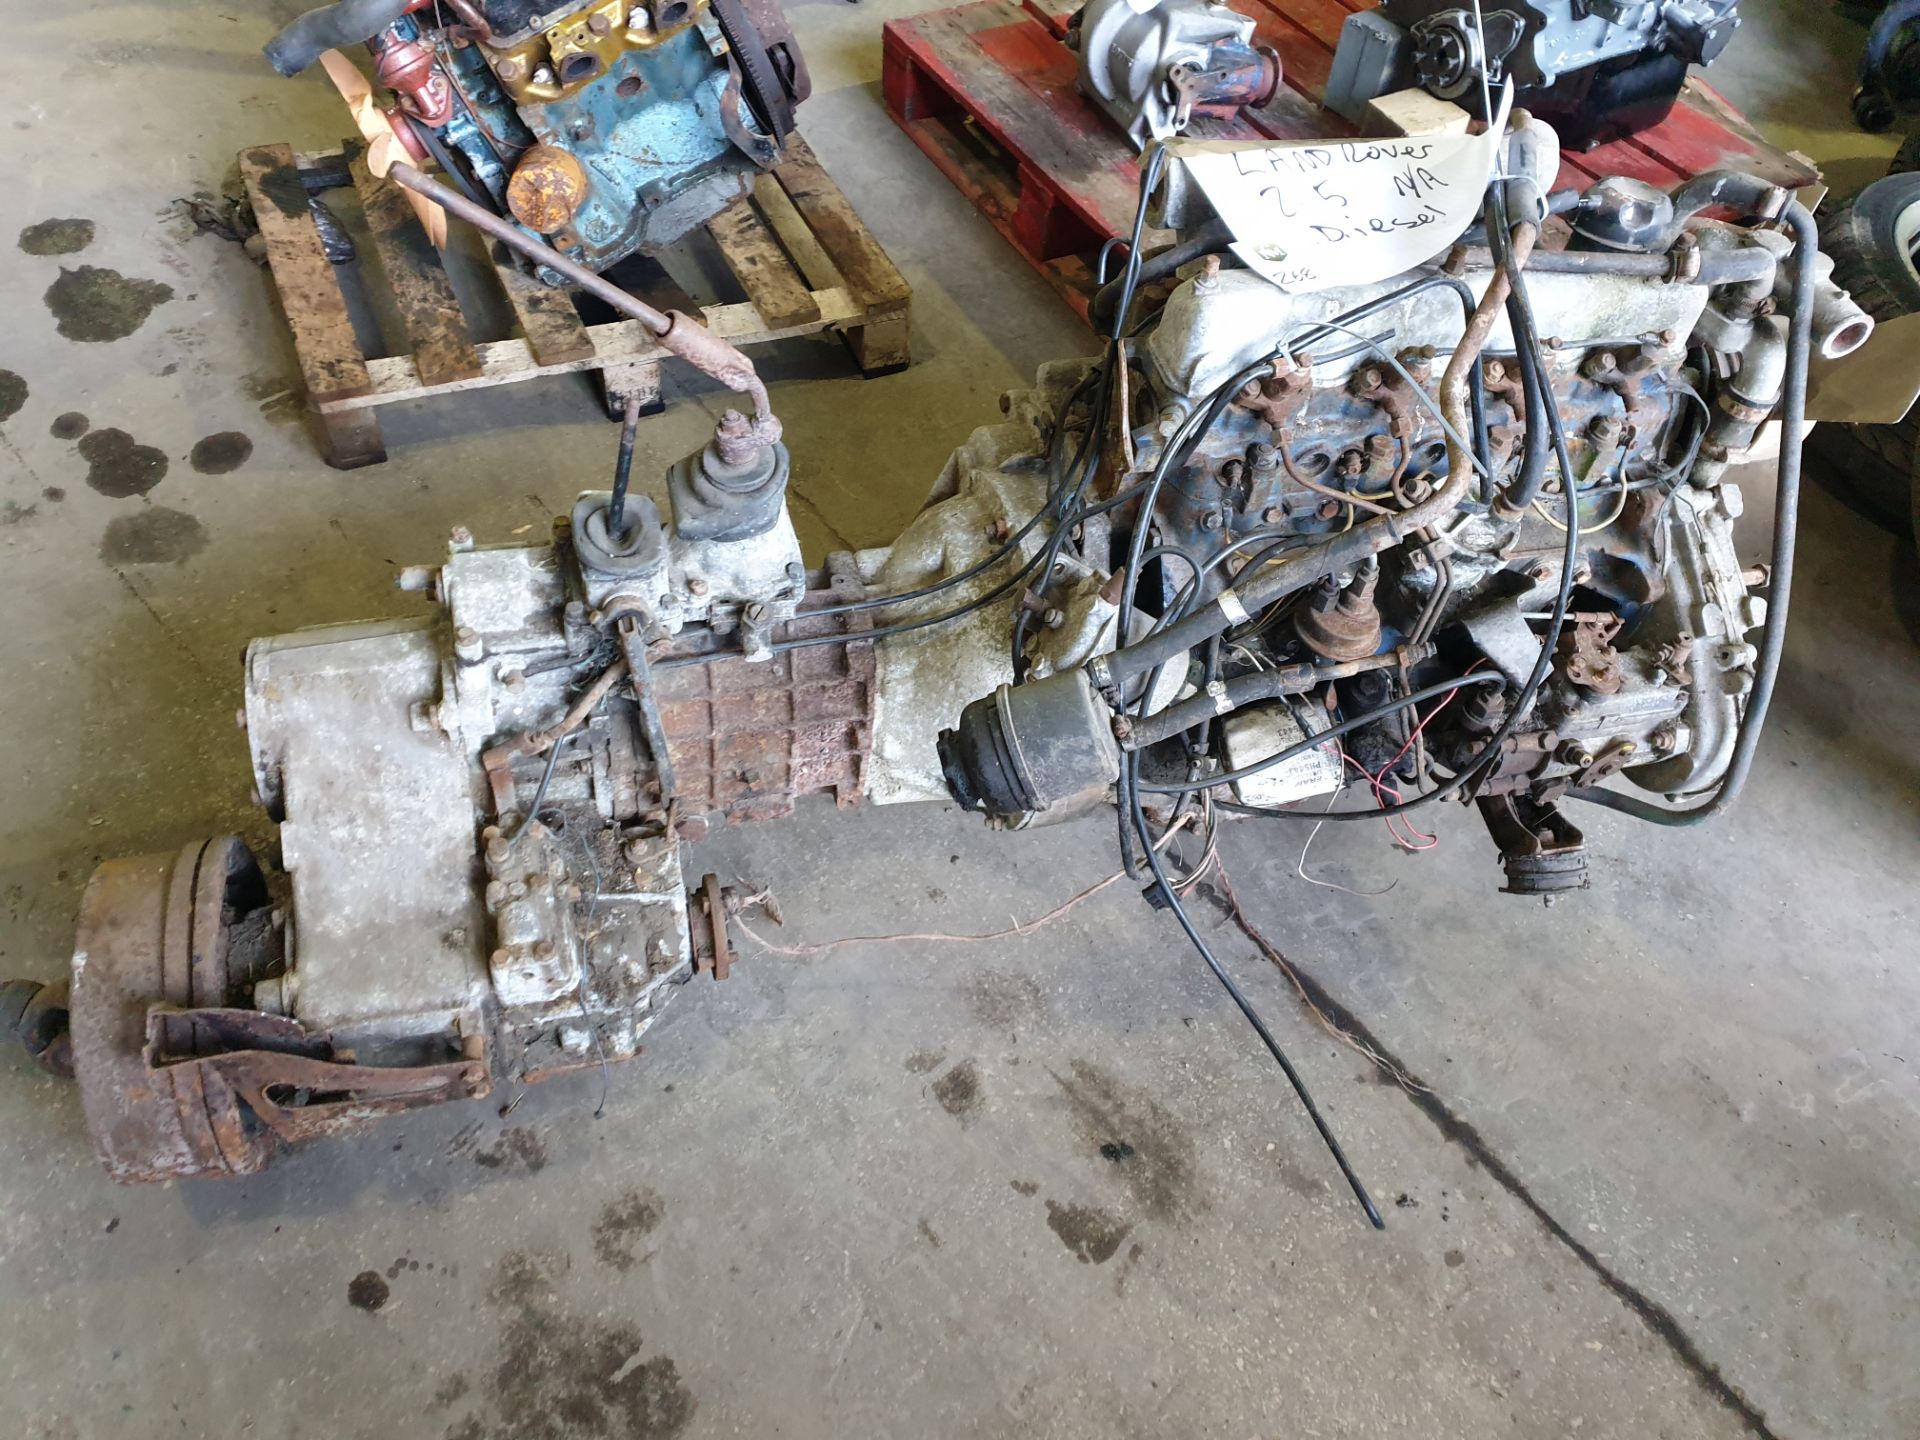 Land rover 2.5d engine and box